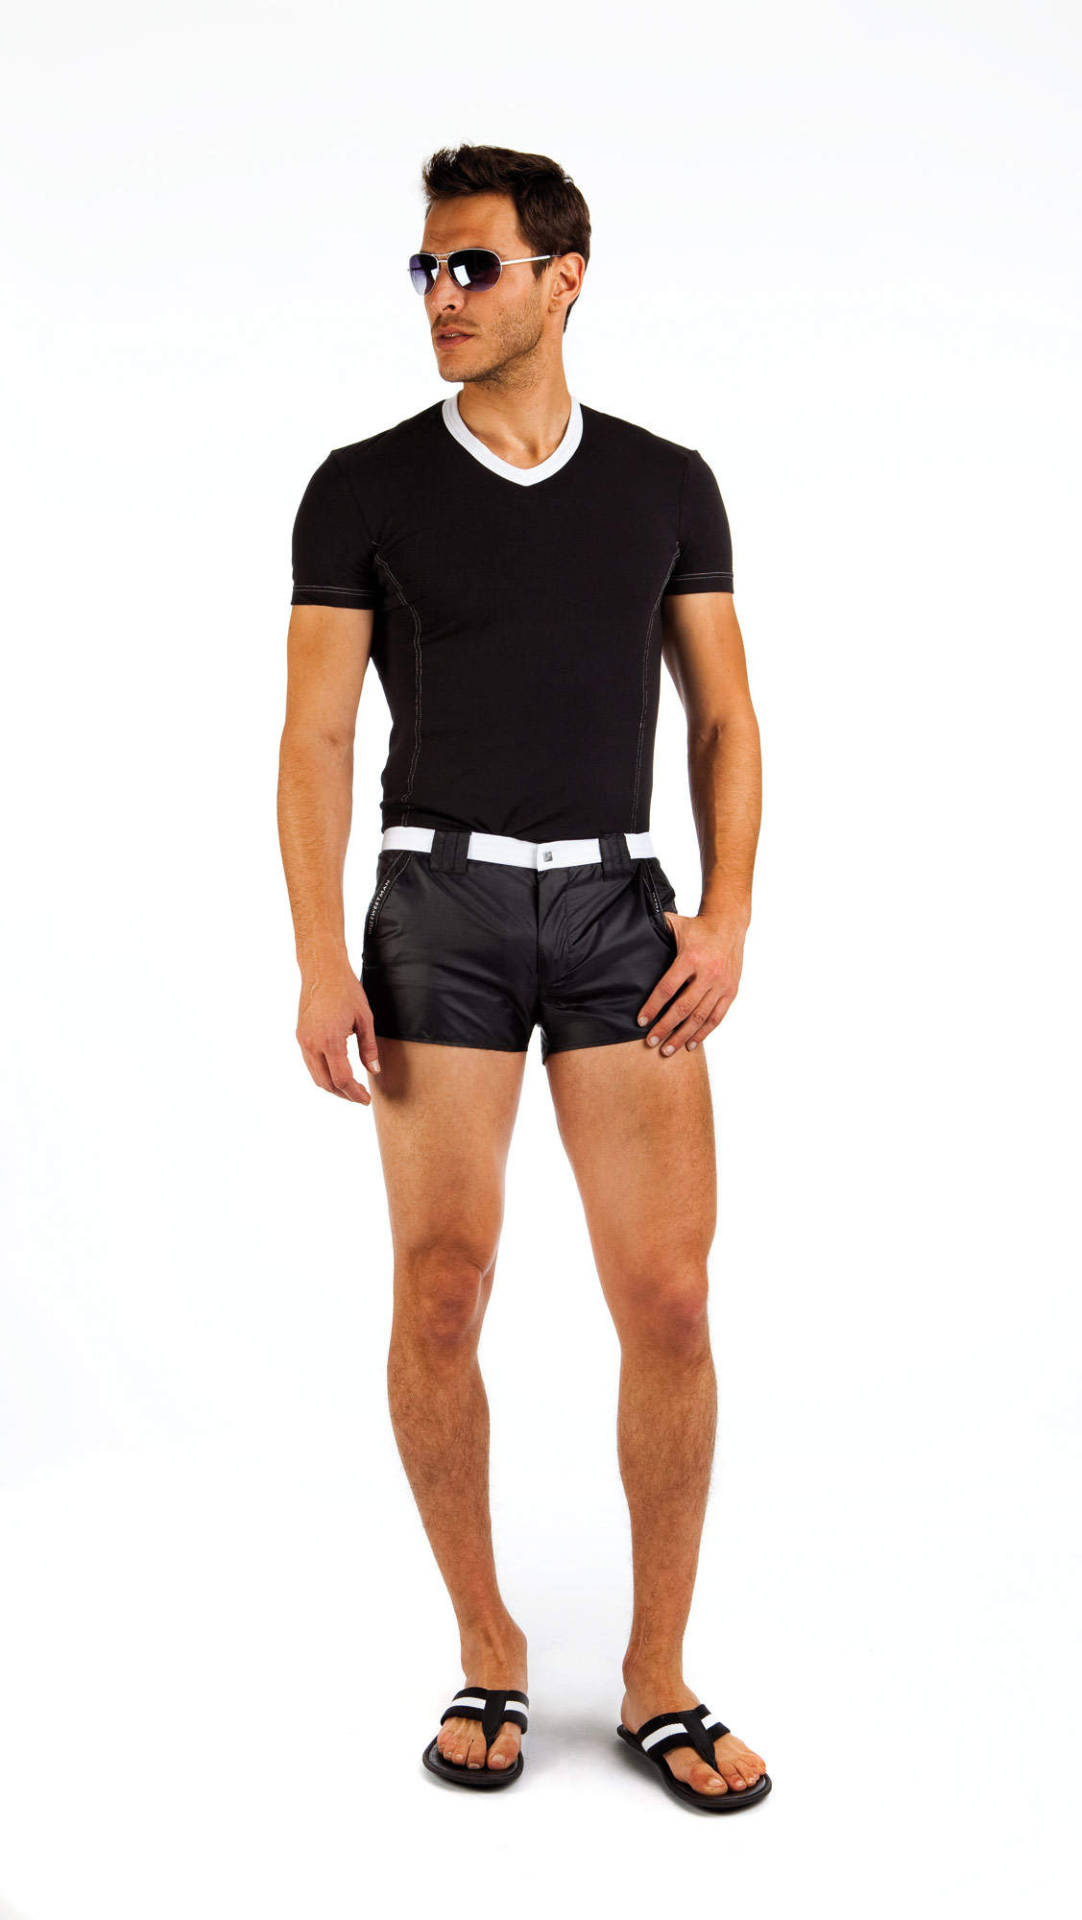 81.Â  Hot shorts from Sweetman, a french company.Â  Unfortunately, they&rsquo;re